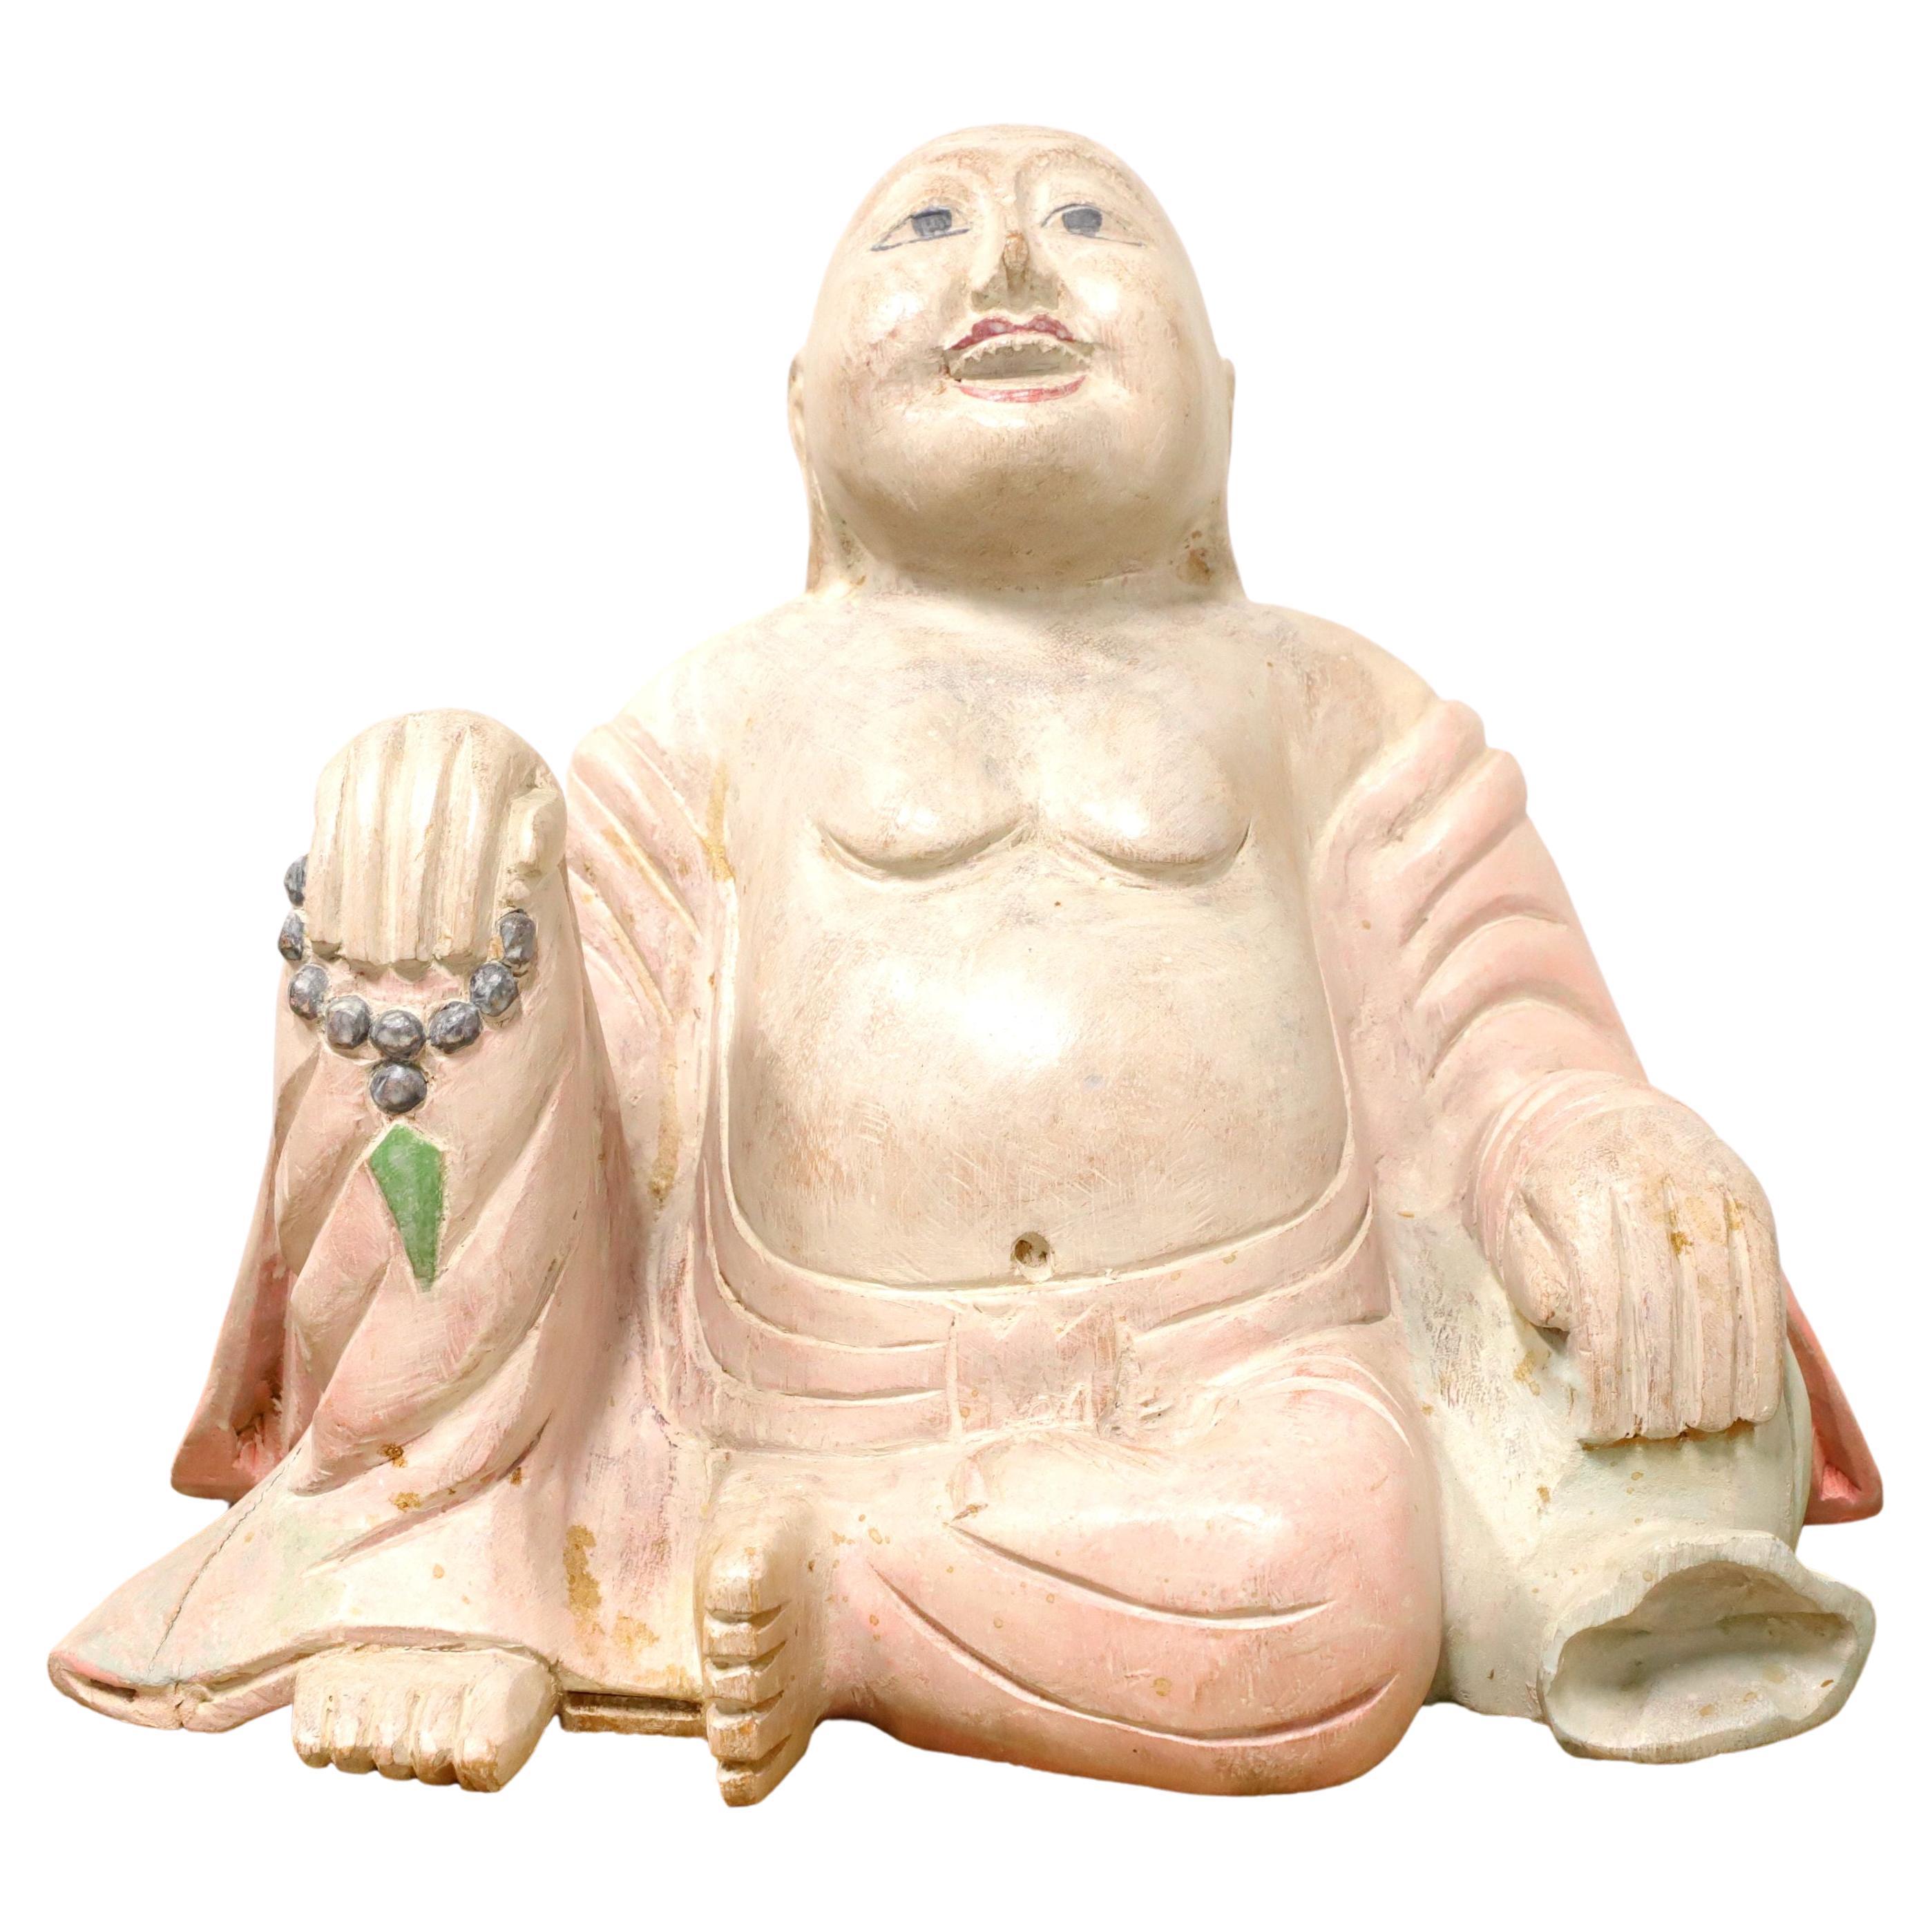 Mid 20th Century Carved Wood Smiling Buddha Figure Sculpture For Sale